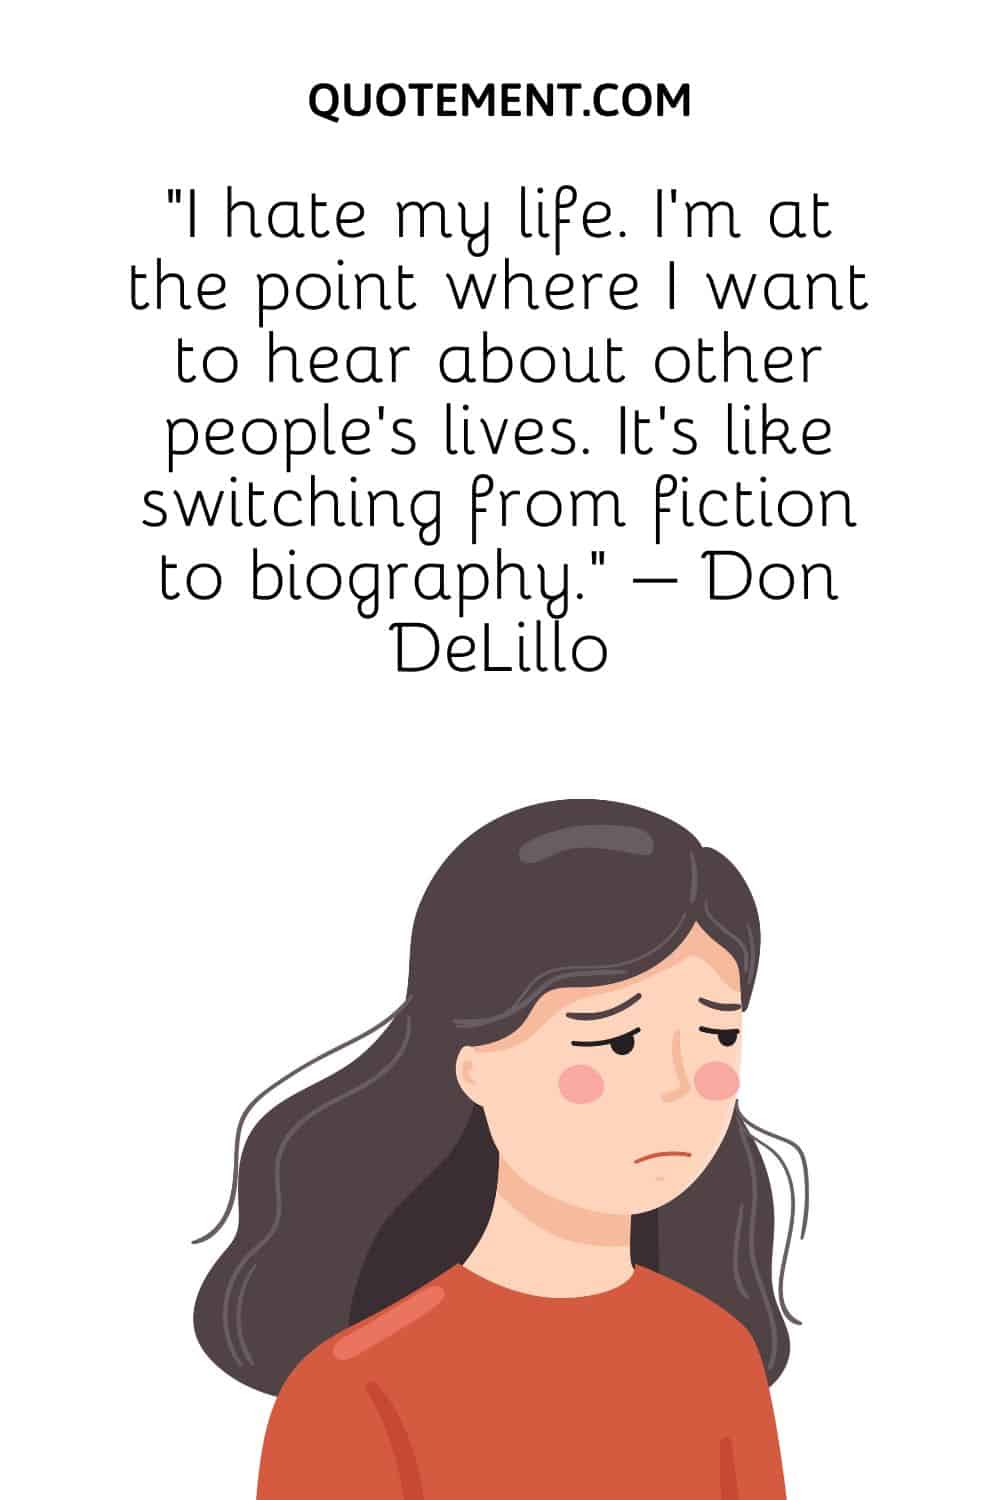 “I hate my life. I’m at the point where I want to hear about other people’s lives. It’s like switching from fiction to biography.” – Don DeLillo